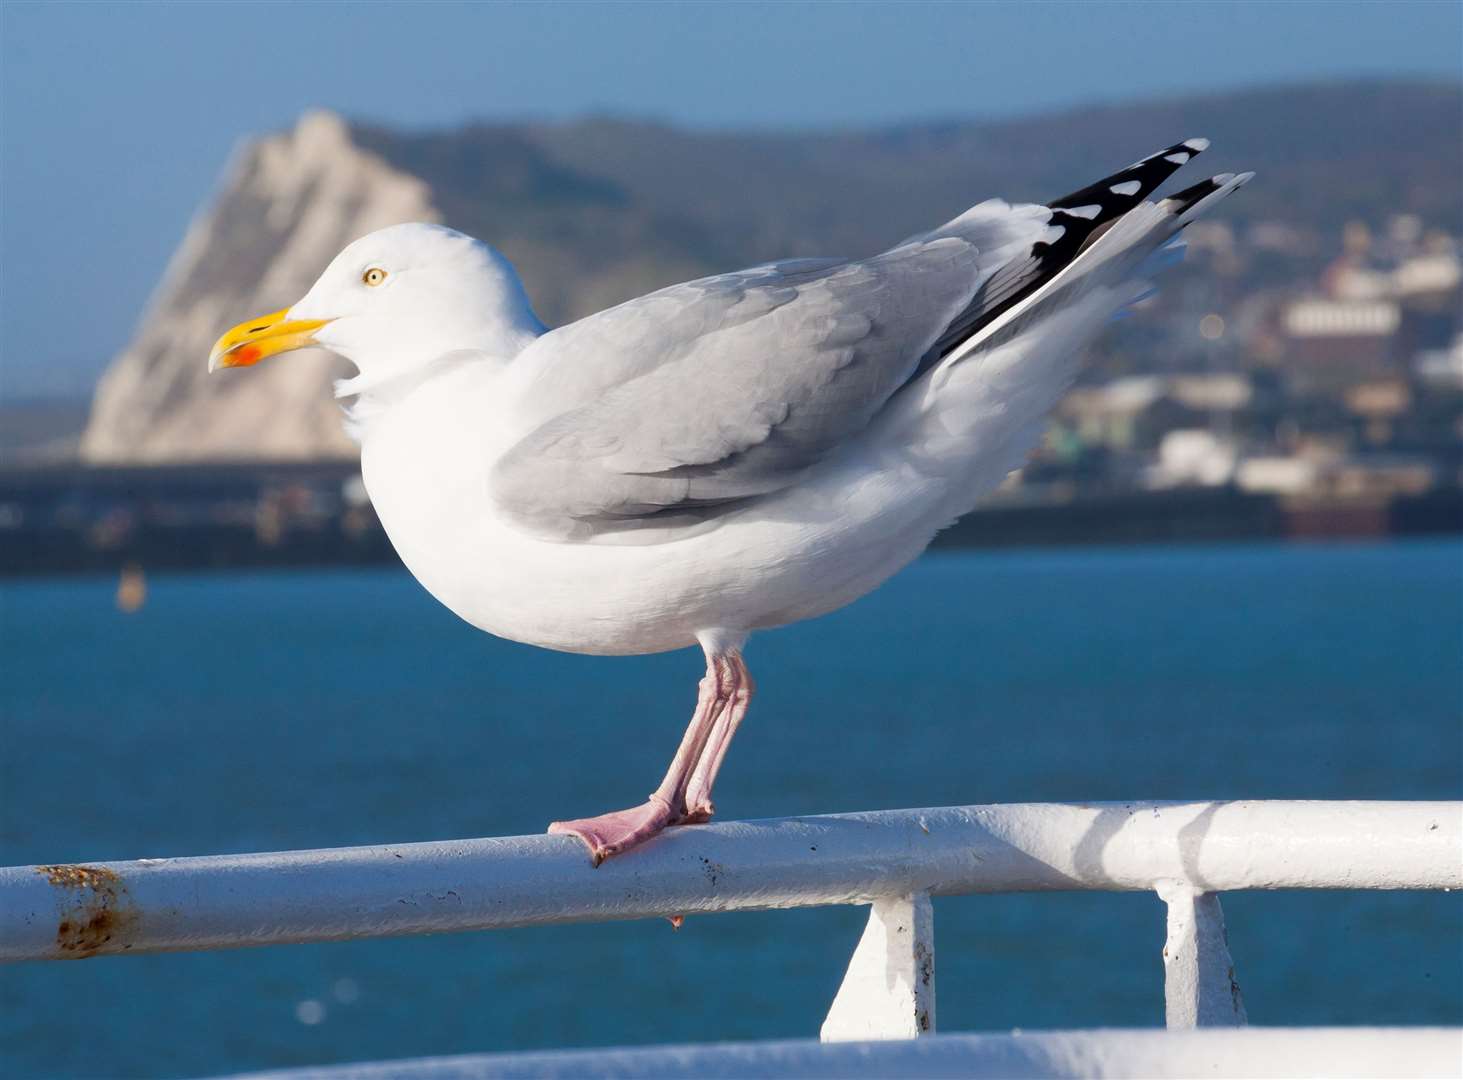 Seagulls have washed up dead on the coast coated in the oil and tar. Picture: Stock image